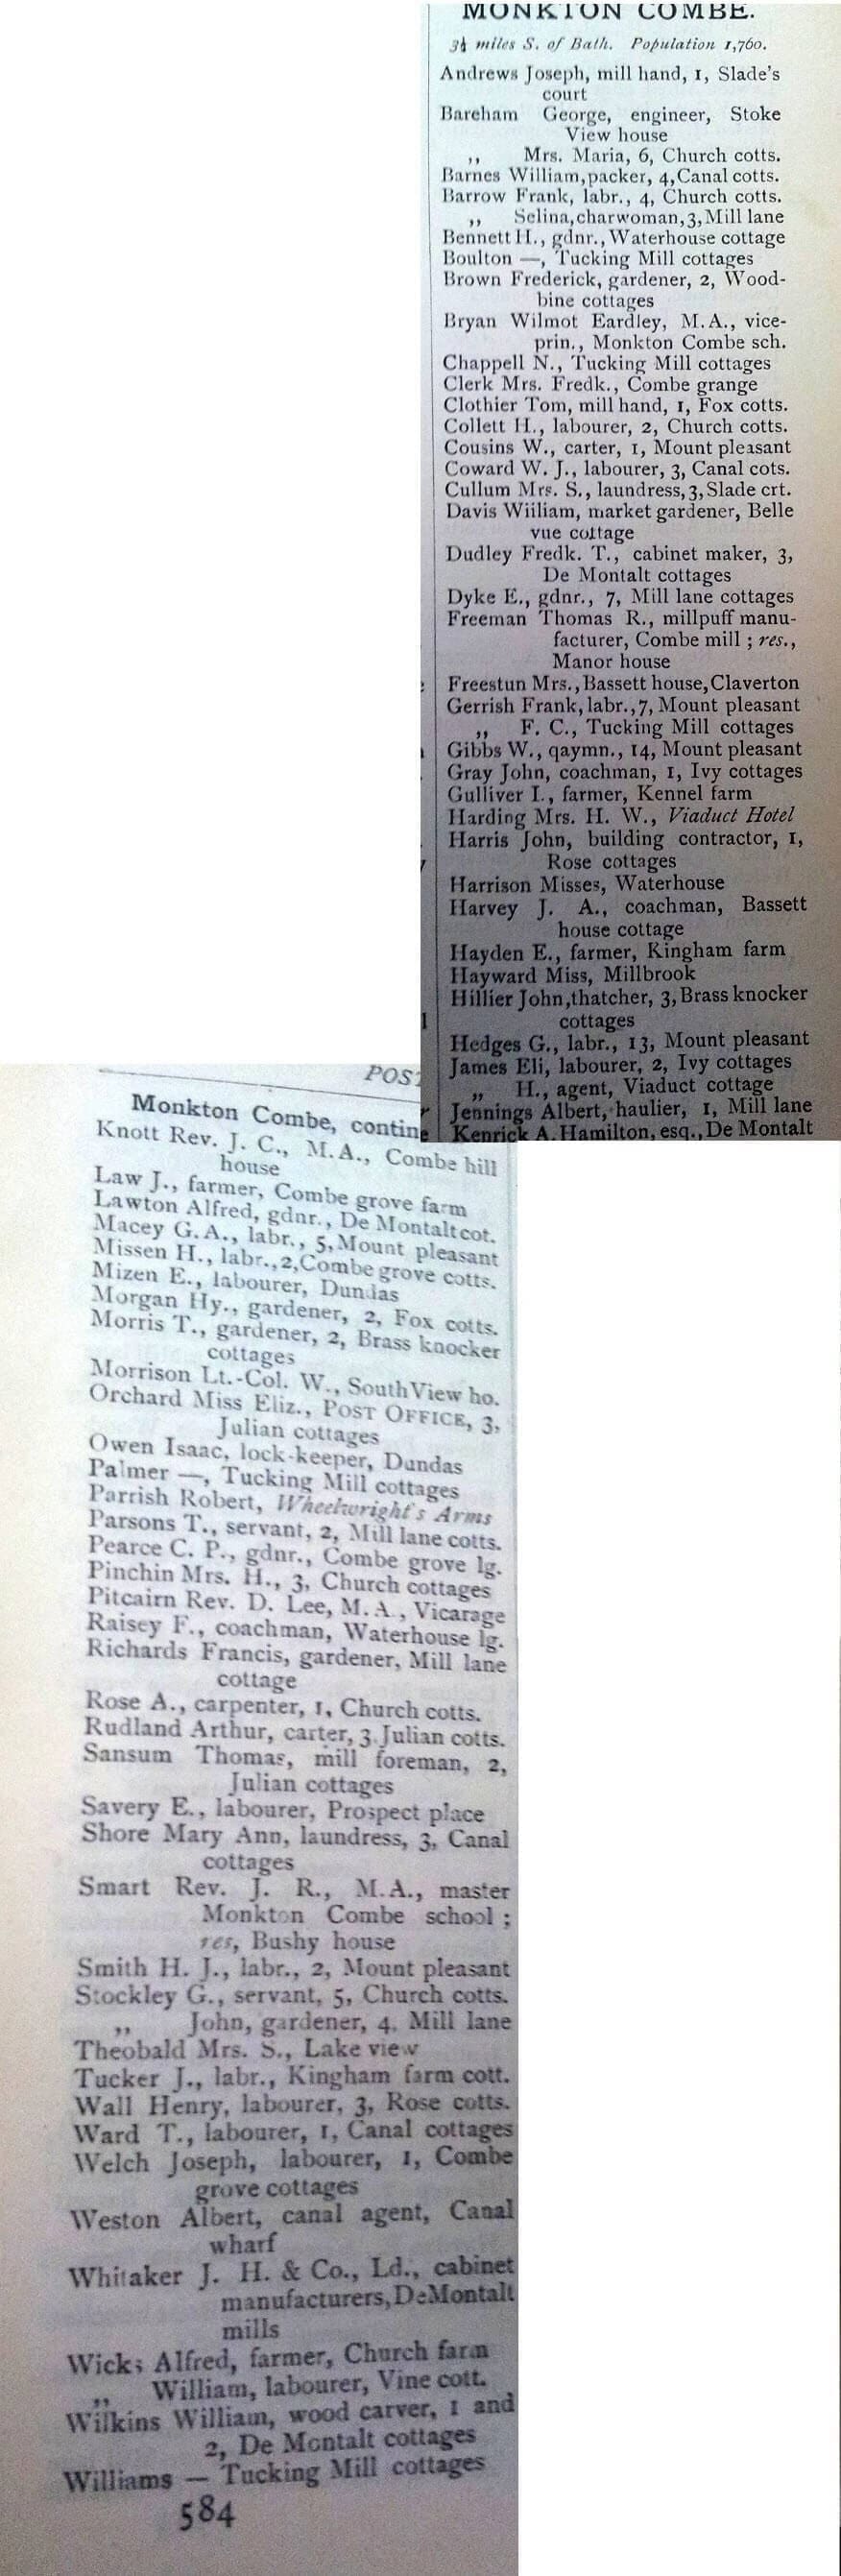 1899 Post Office Directory for Monkton Combe